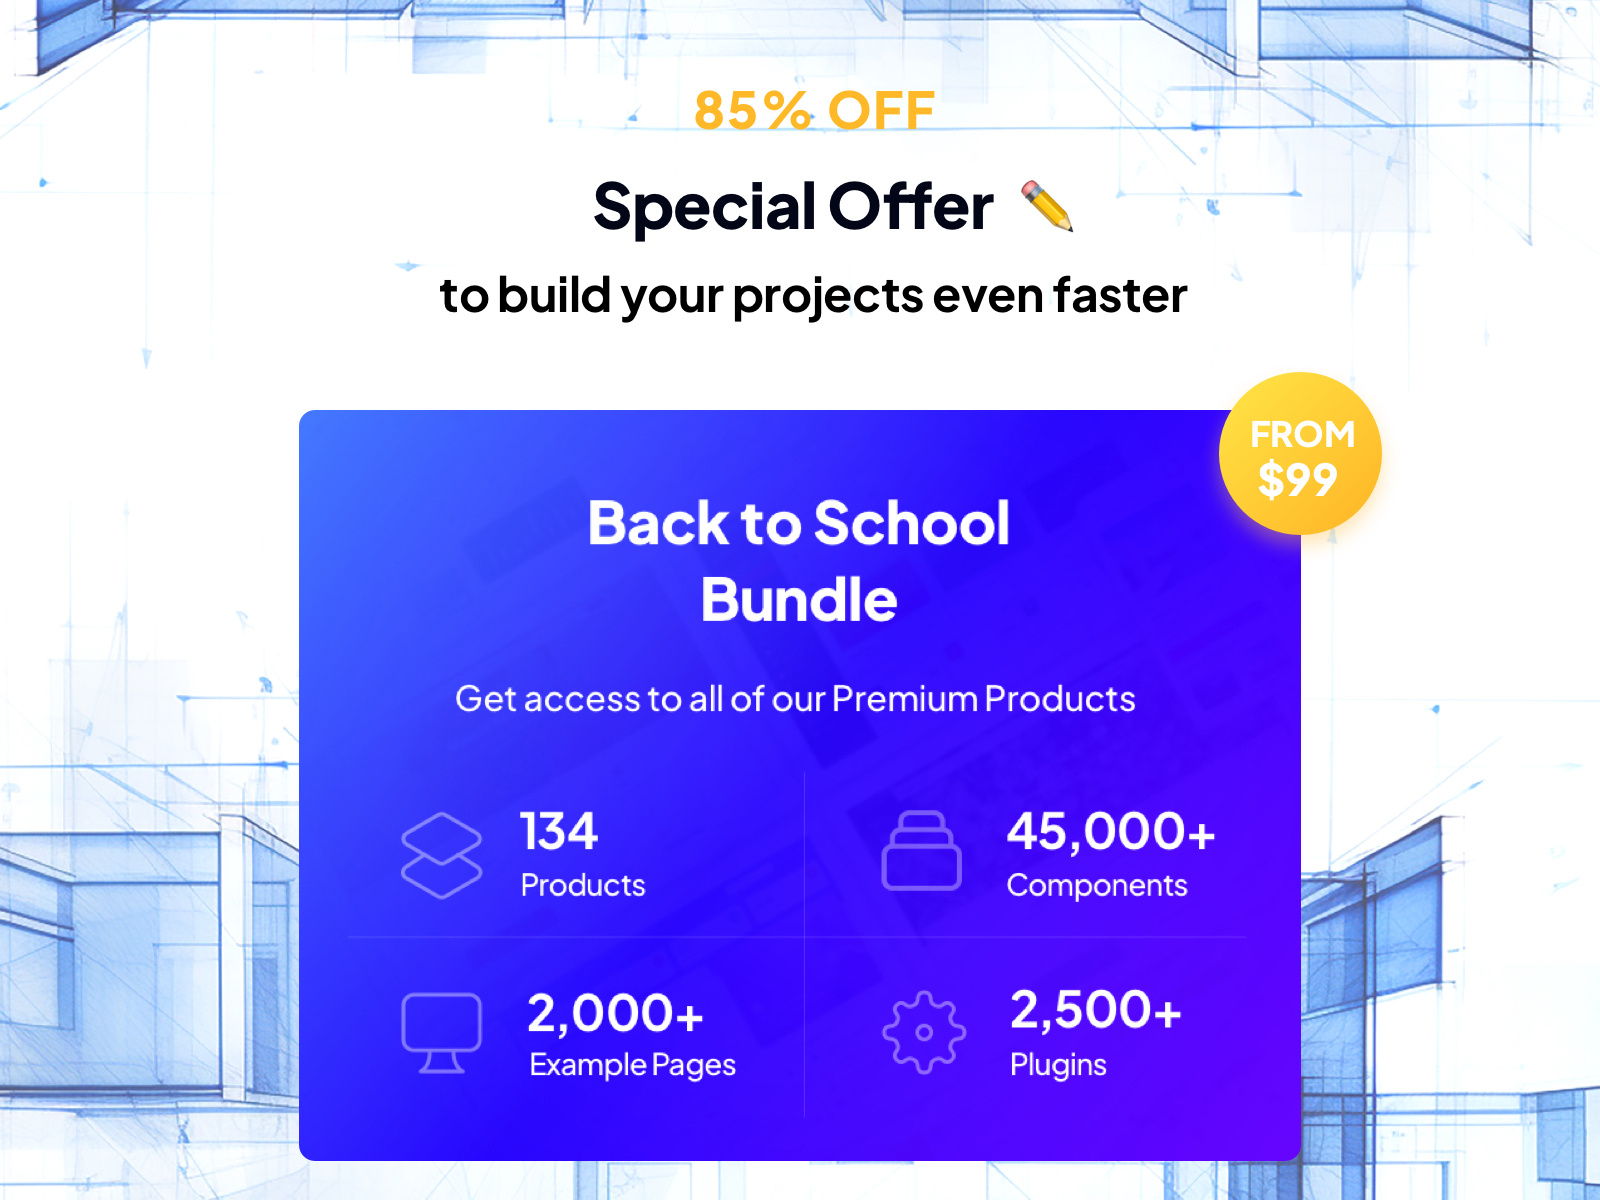 back-to-school-at-creative-tim-is-here-by-creative-tim-on-dribbble